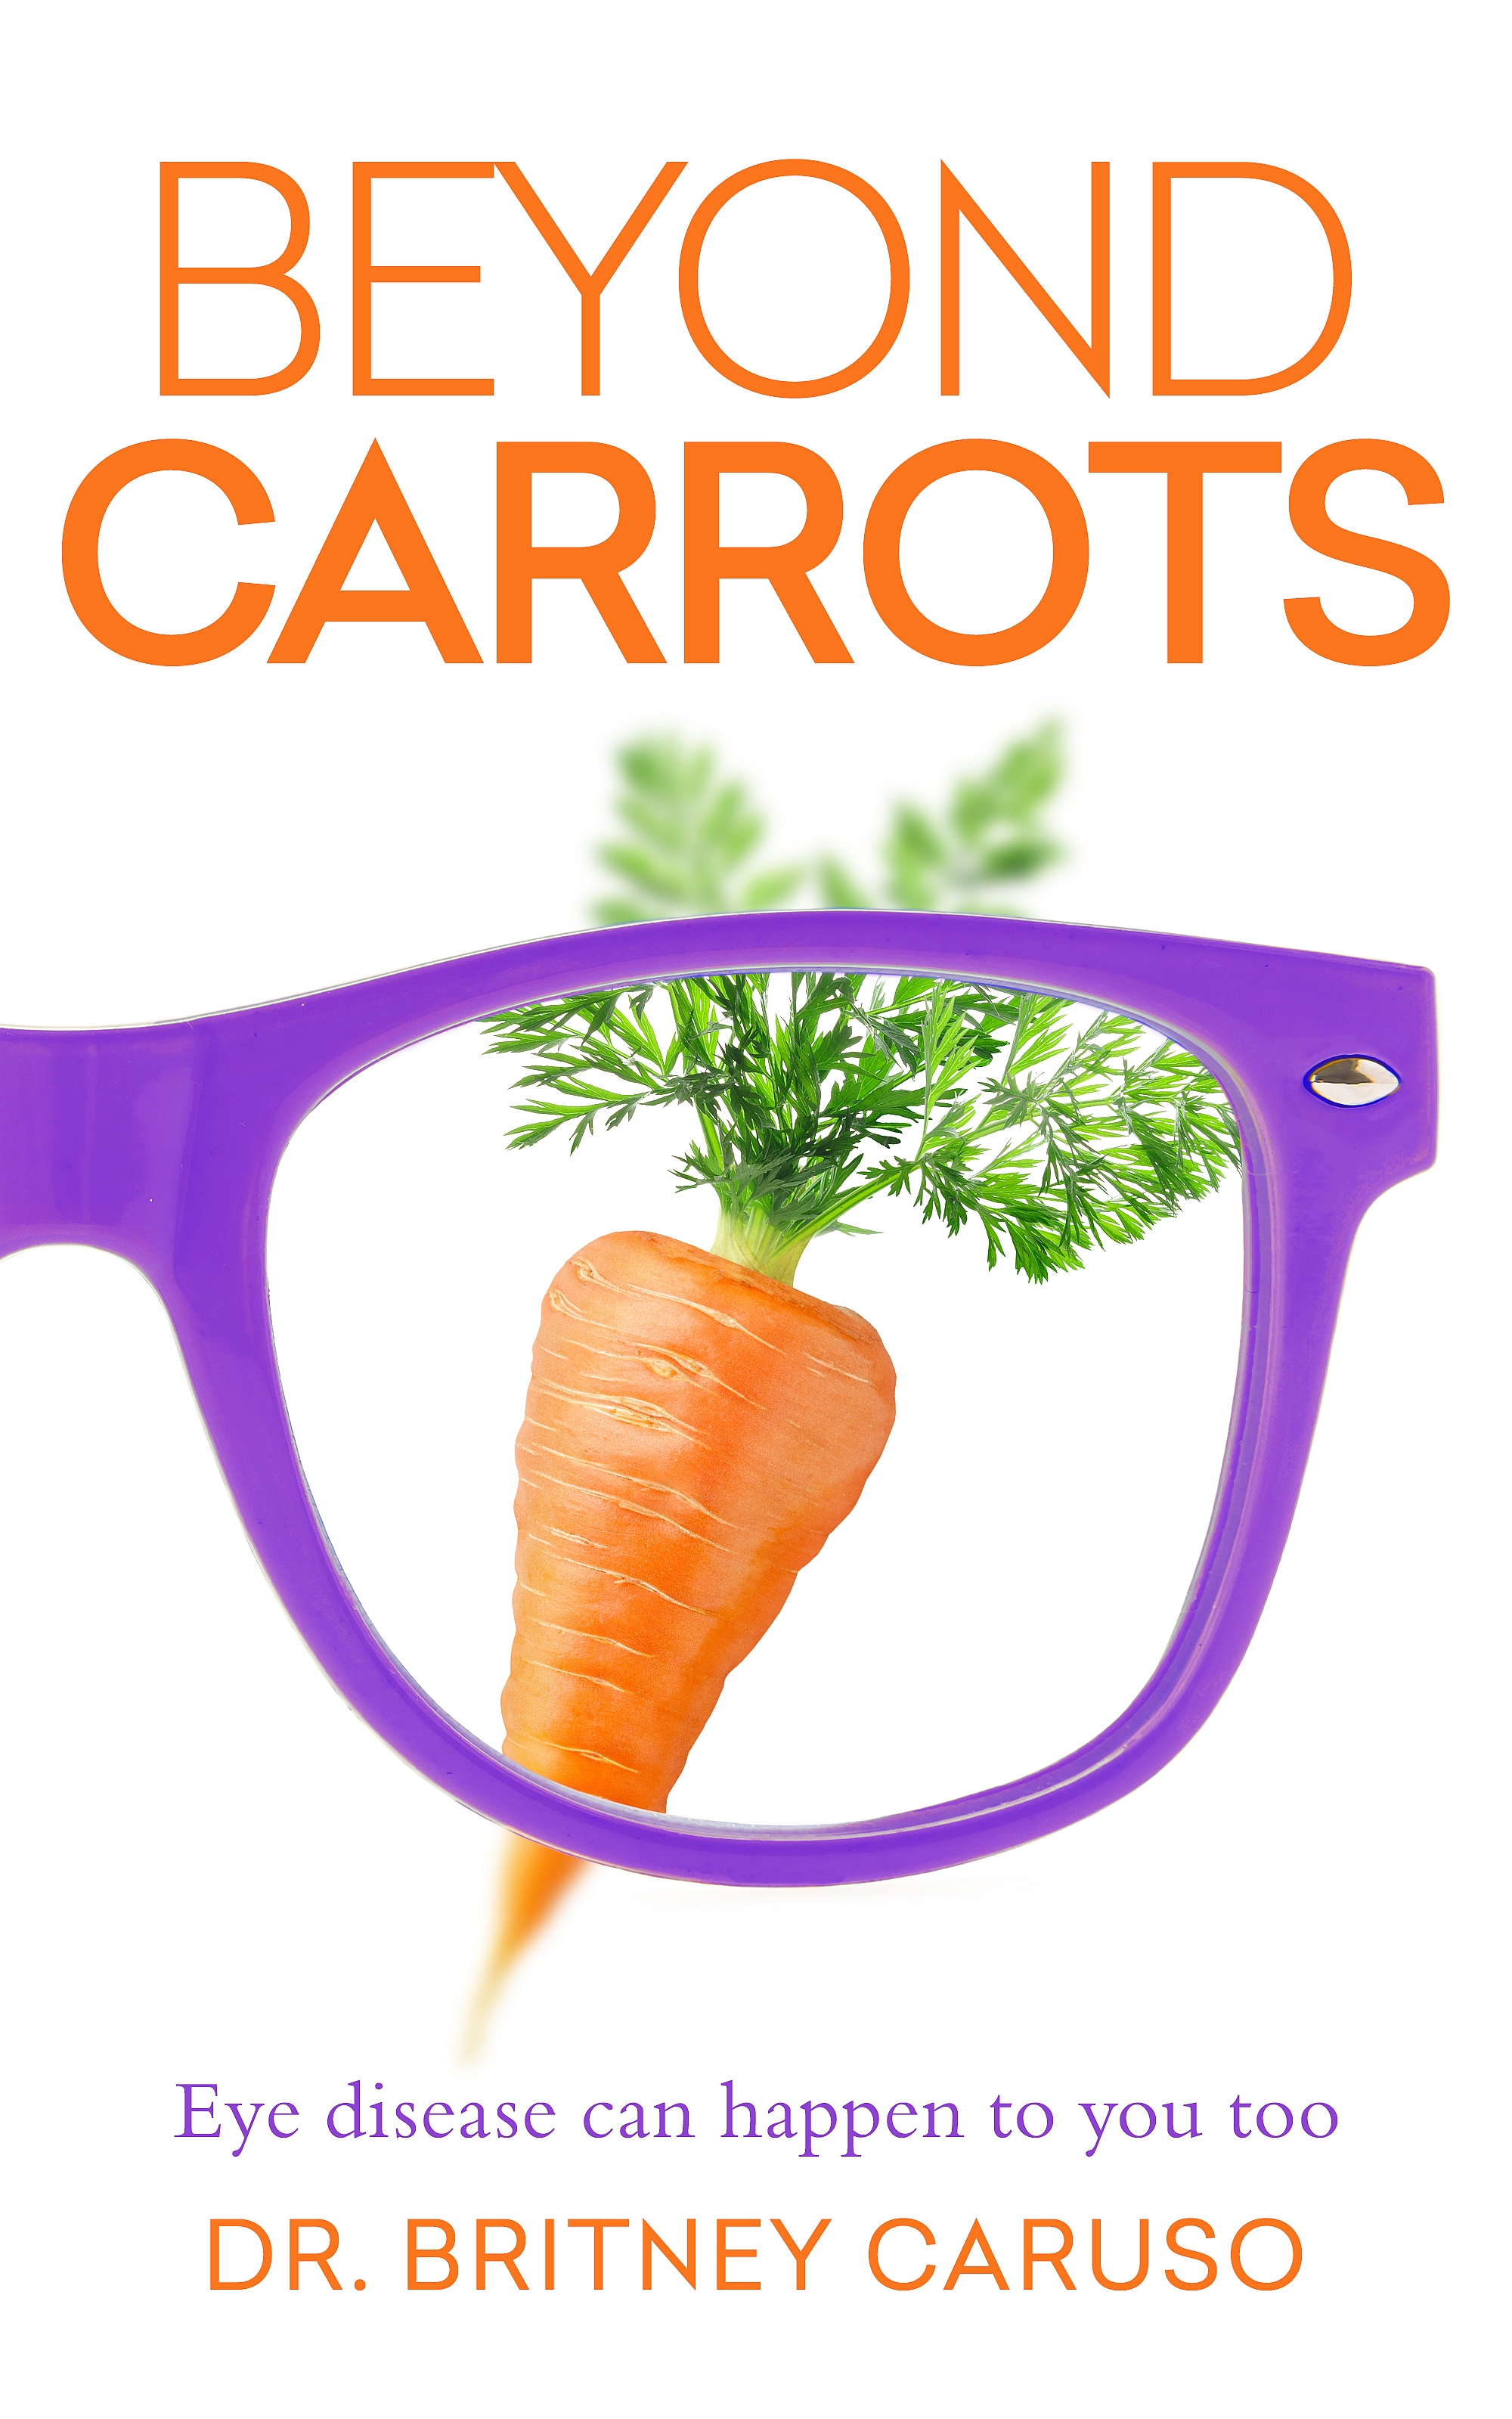 New book "Beyond Carrots" by Dr. Britney Caruso is released, a detailed guide to maintain eye health through diet and lifestyle from an eye doctor who nearly lost her vision